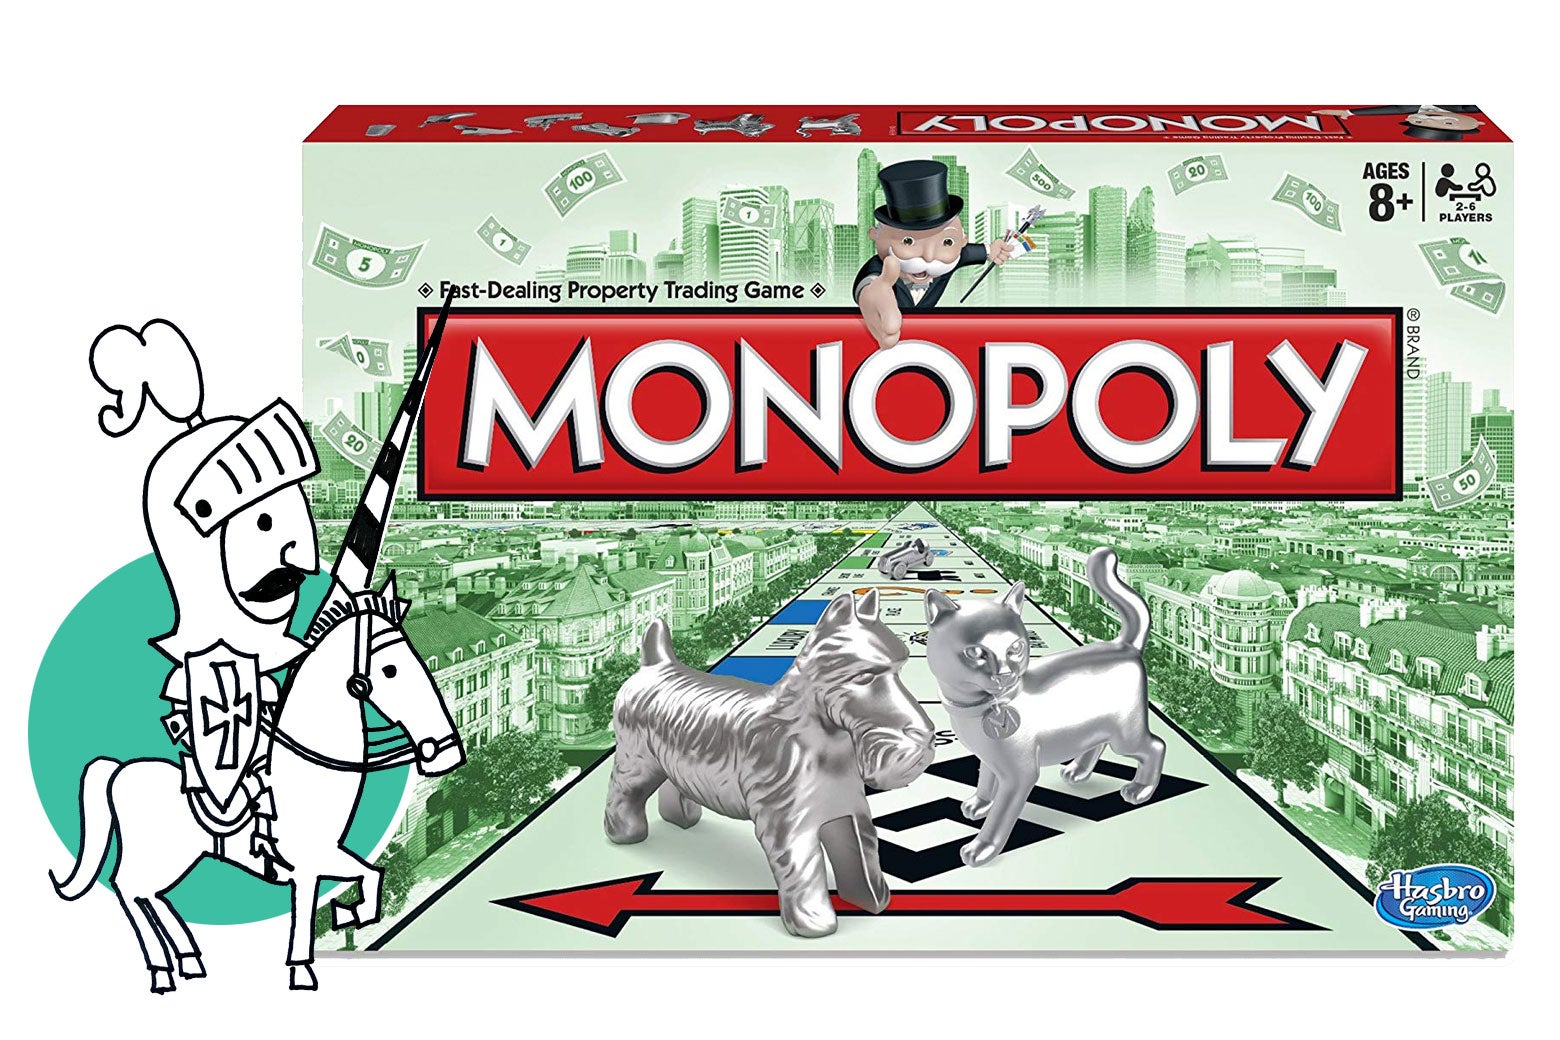 A Monopoly game being defended by a knight.